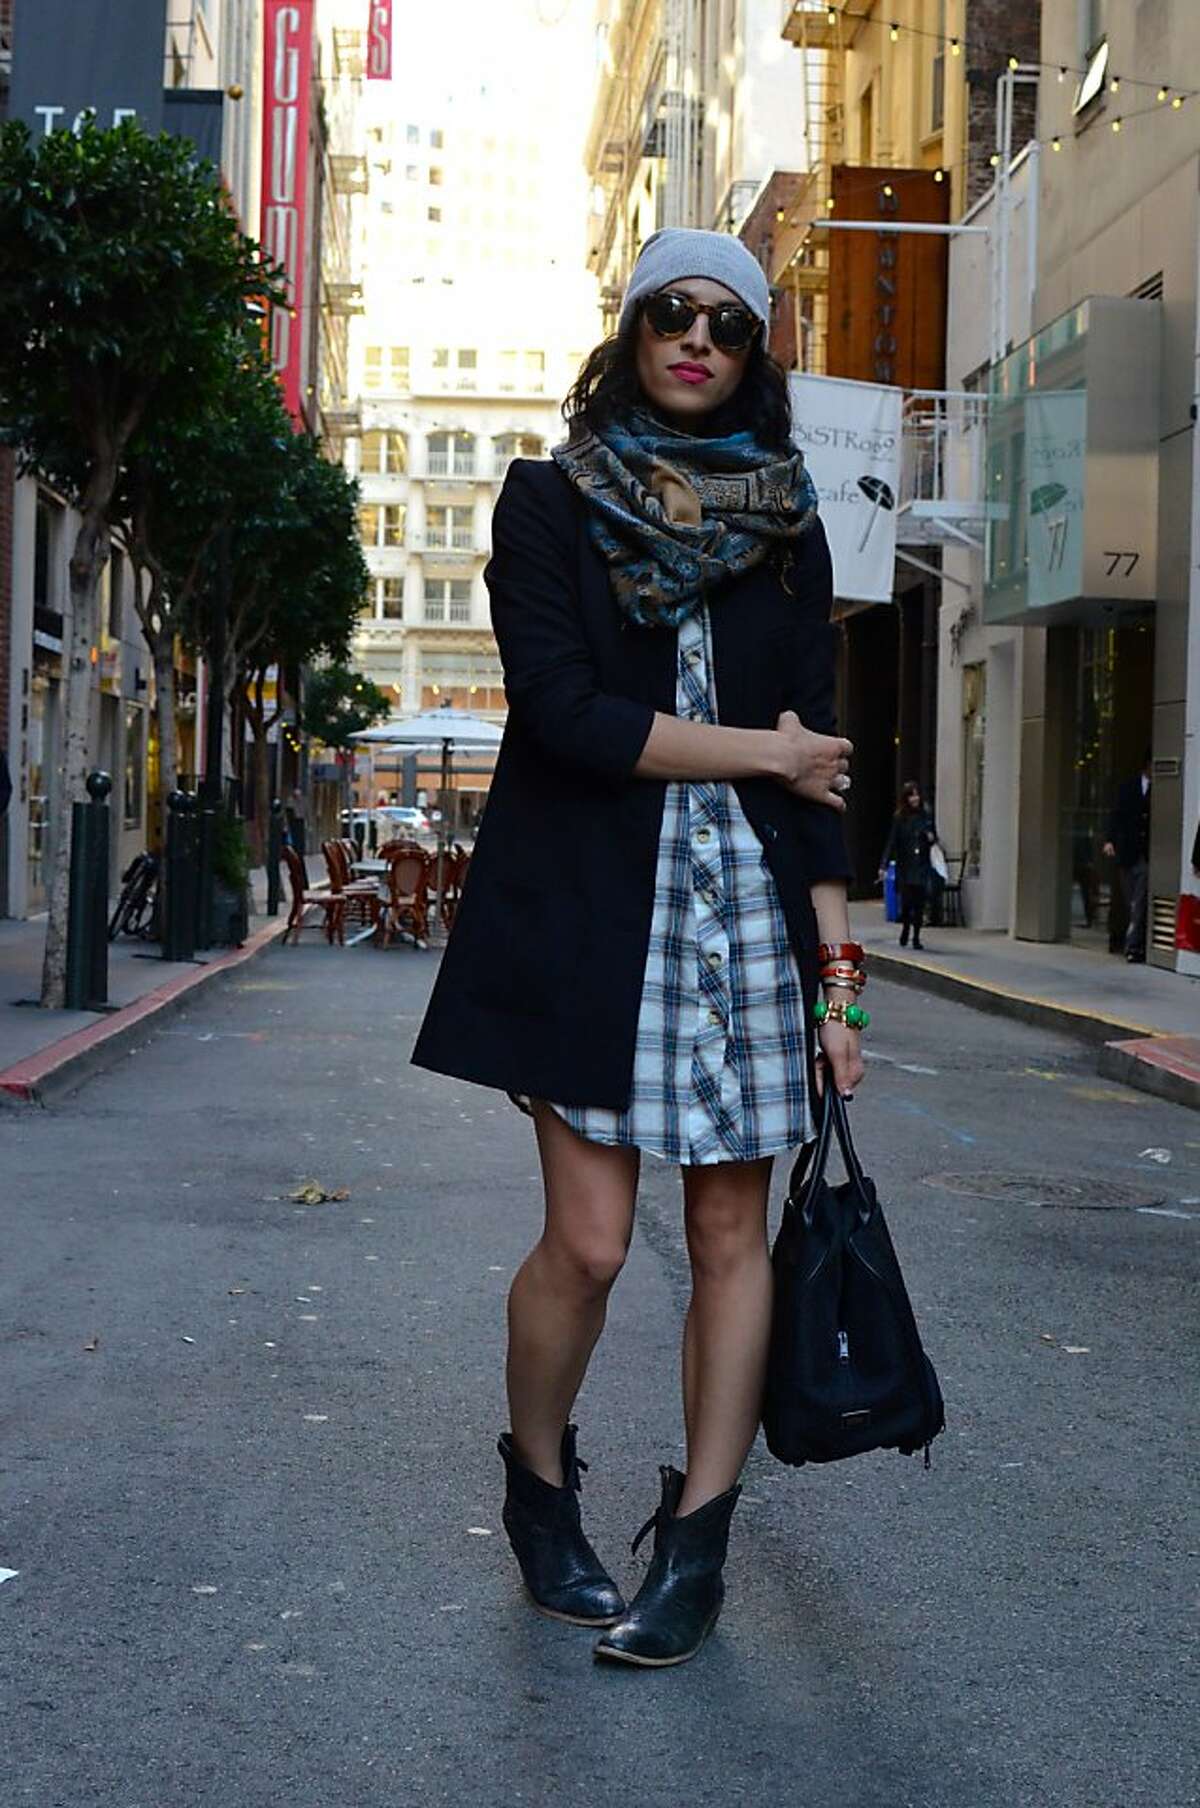 San Francisco has more fashion bloggers per capitan than New York or Los Angeles. Here are some of the more prominent ones. Pictured is Carlina Harris of Allergic to Vanilla